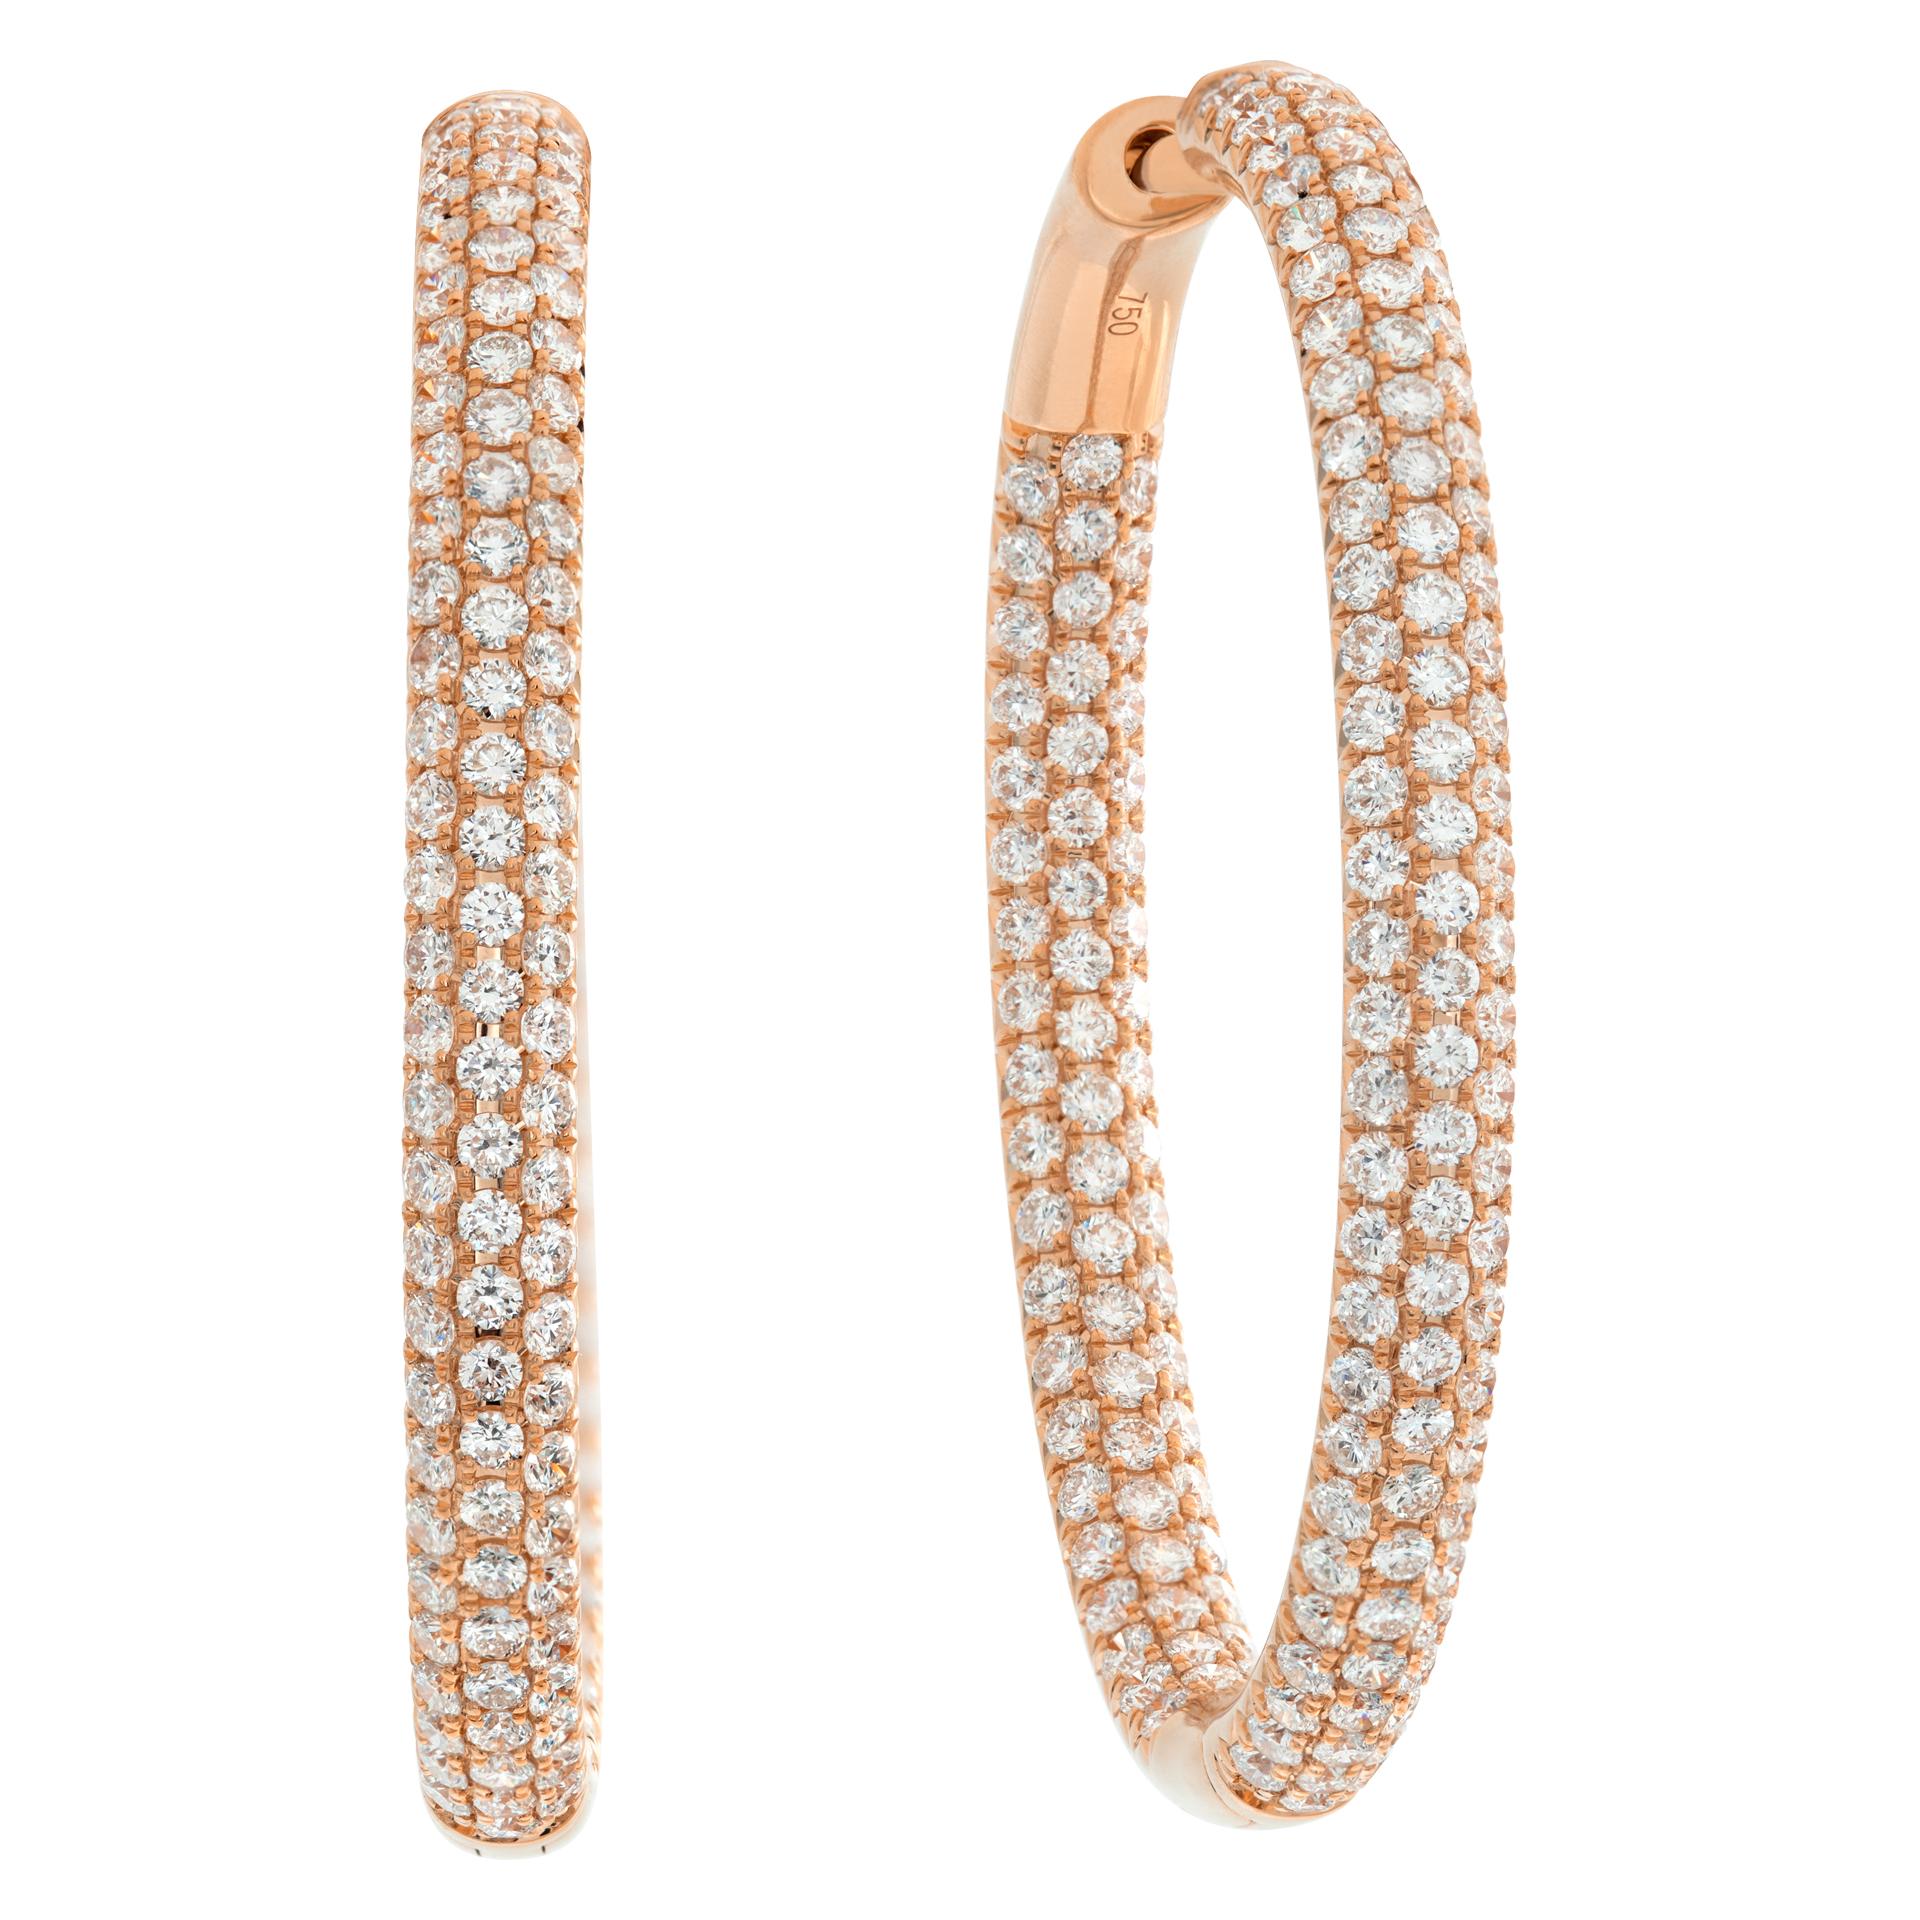 Stunning 18k rose gold inside out diamond oval hoop earrings with 5.63 carats in round cut diamonds (G-H Color, VS Clarity). Drop length: 1.75'', width: 0.15''.